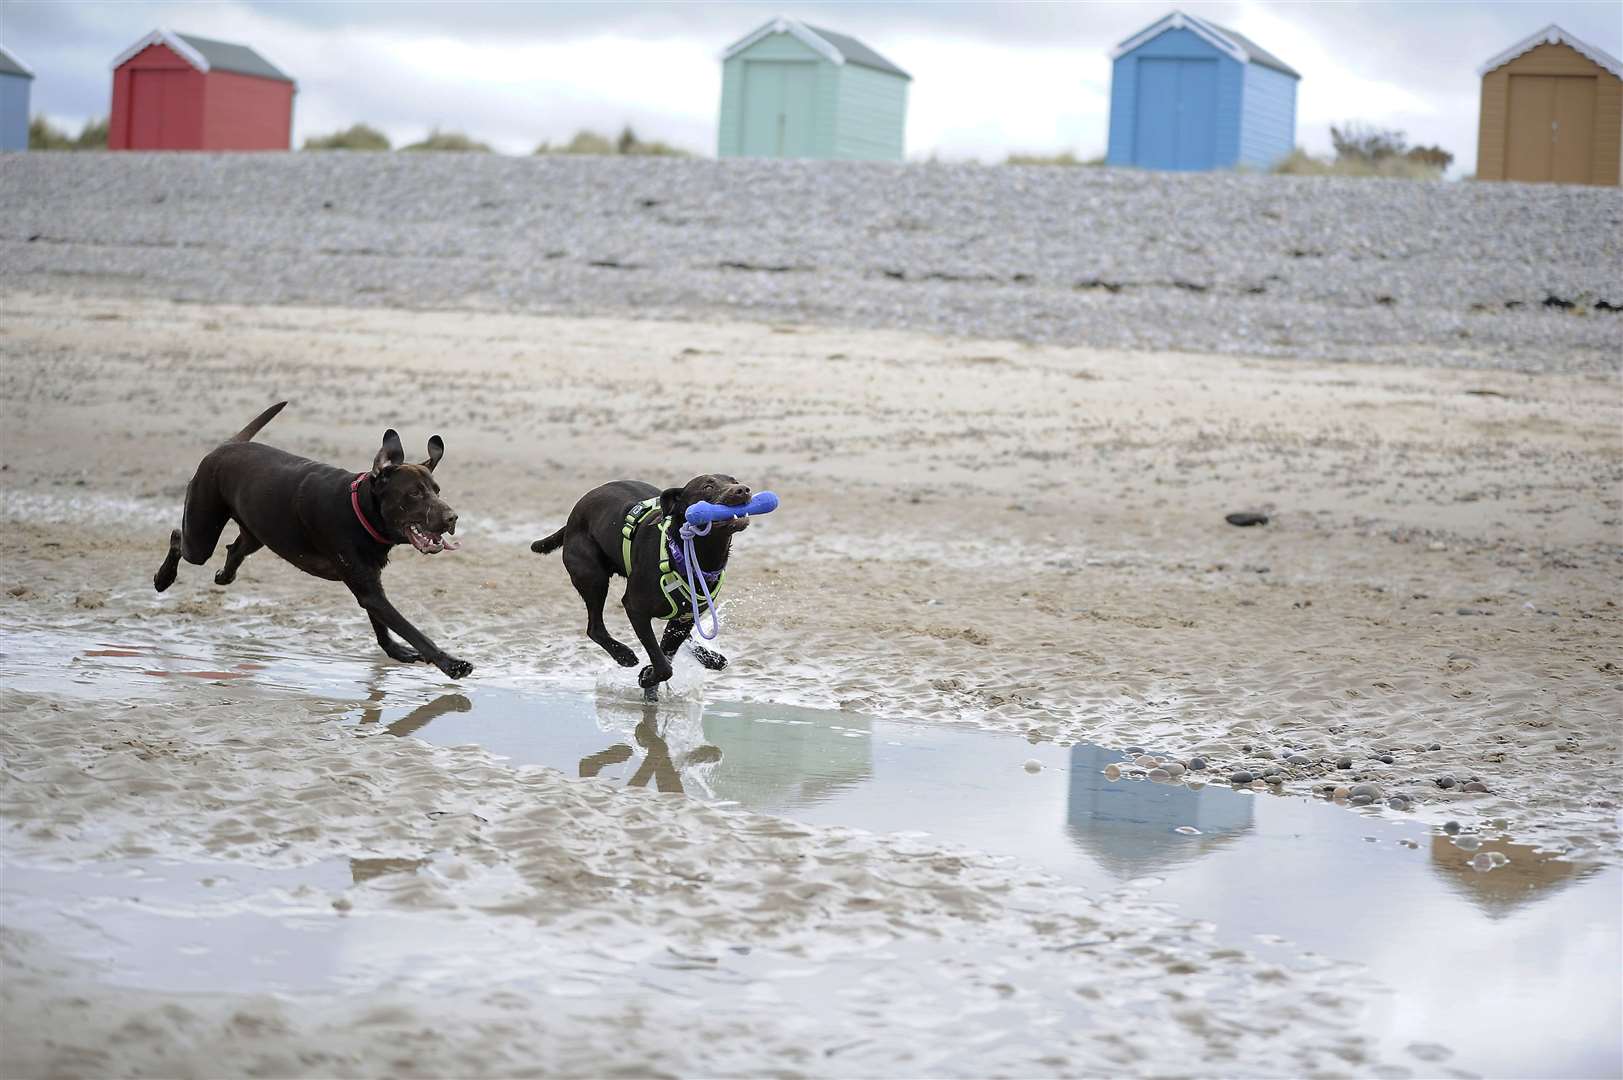 Furry friends frolicking in front of the Findhorn beach huts.